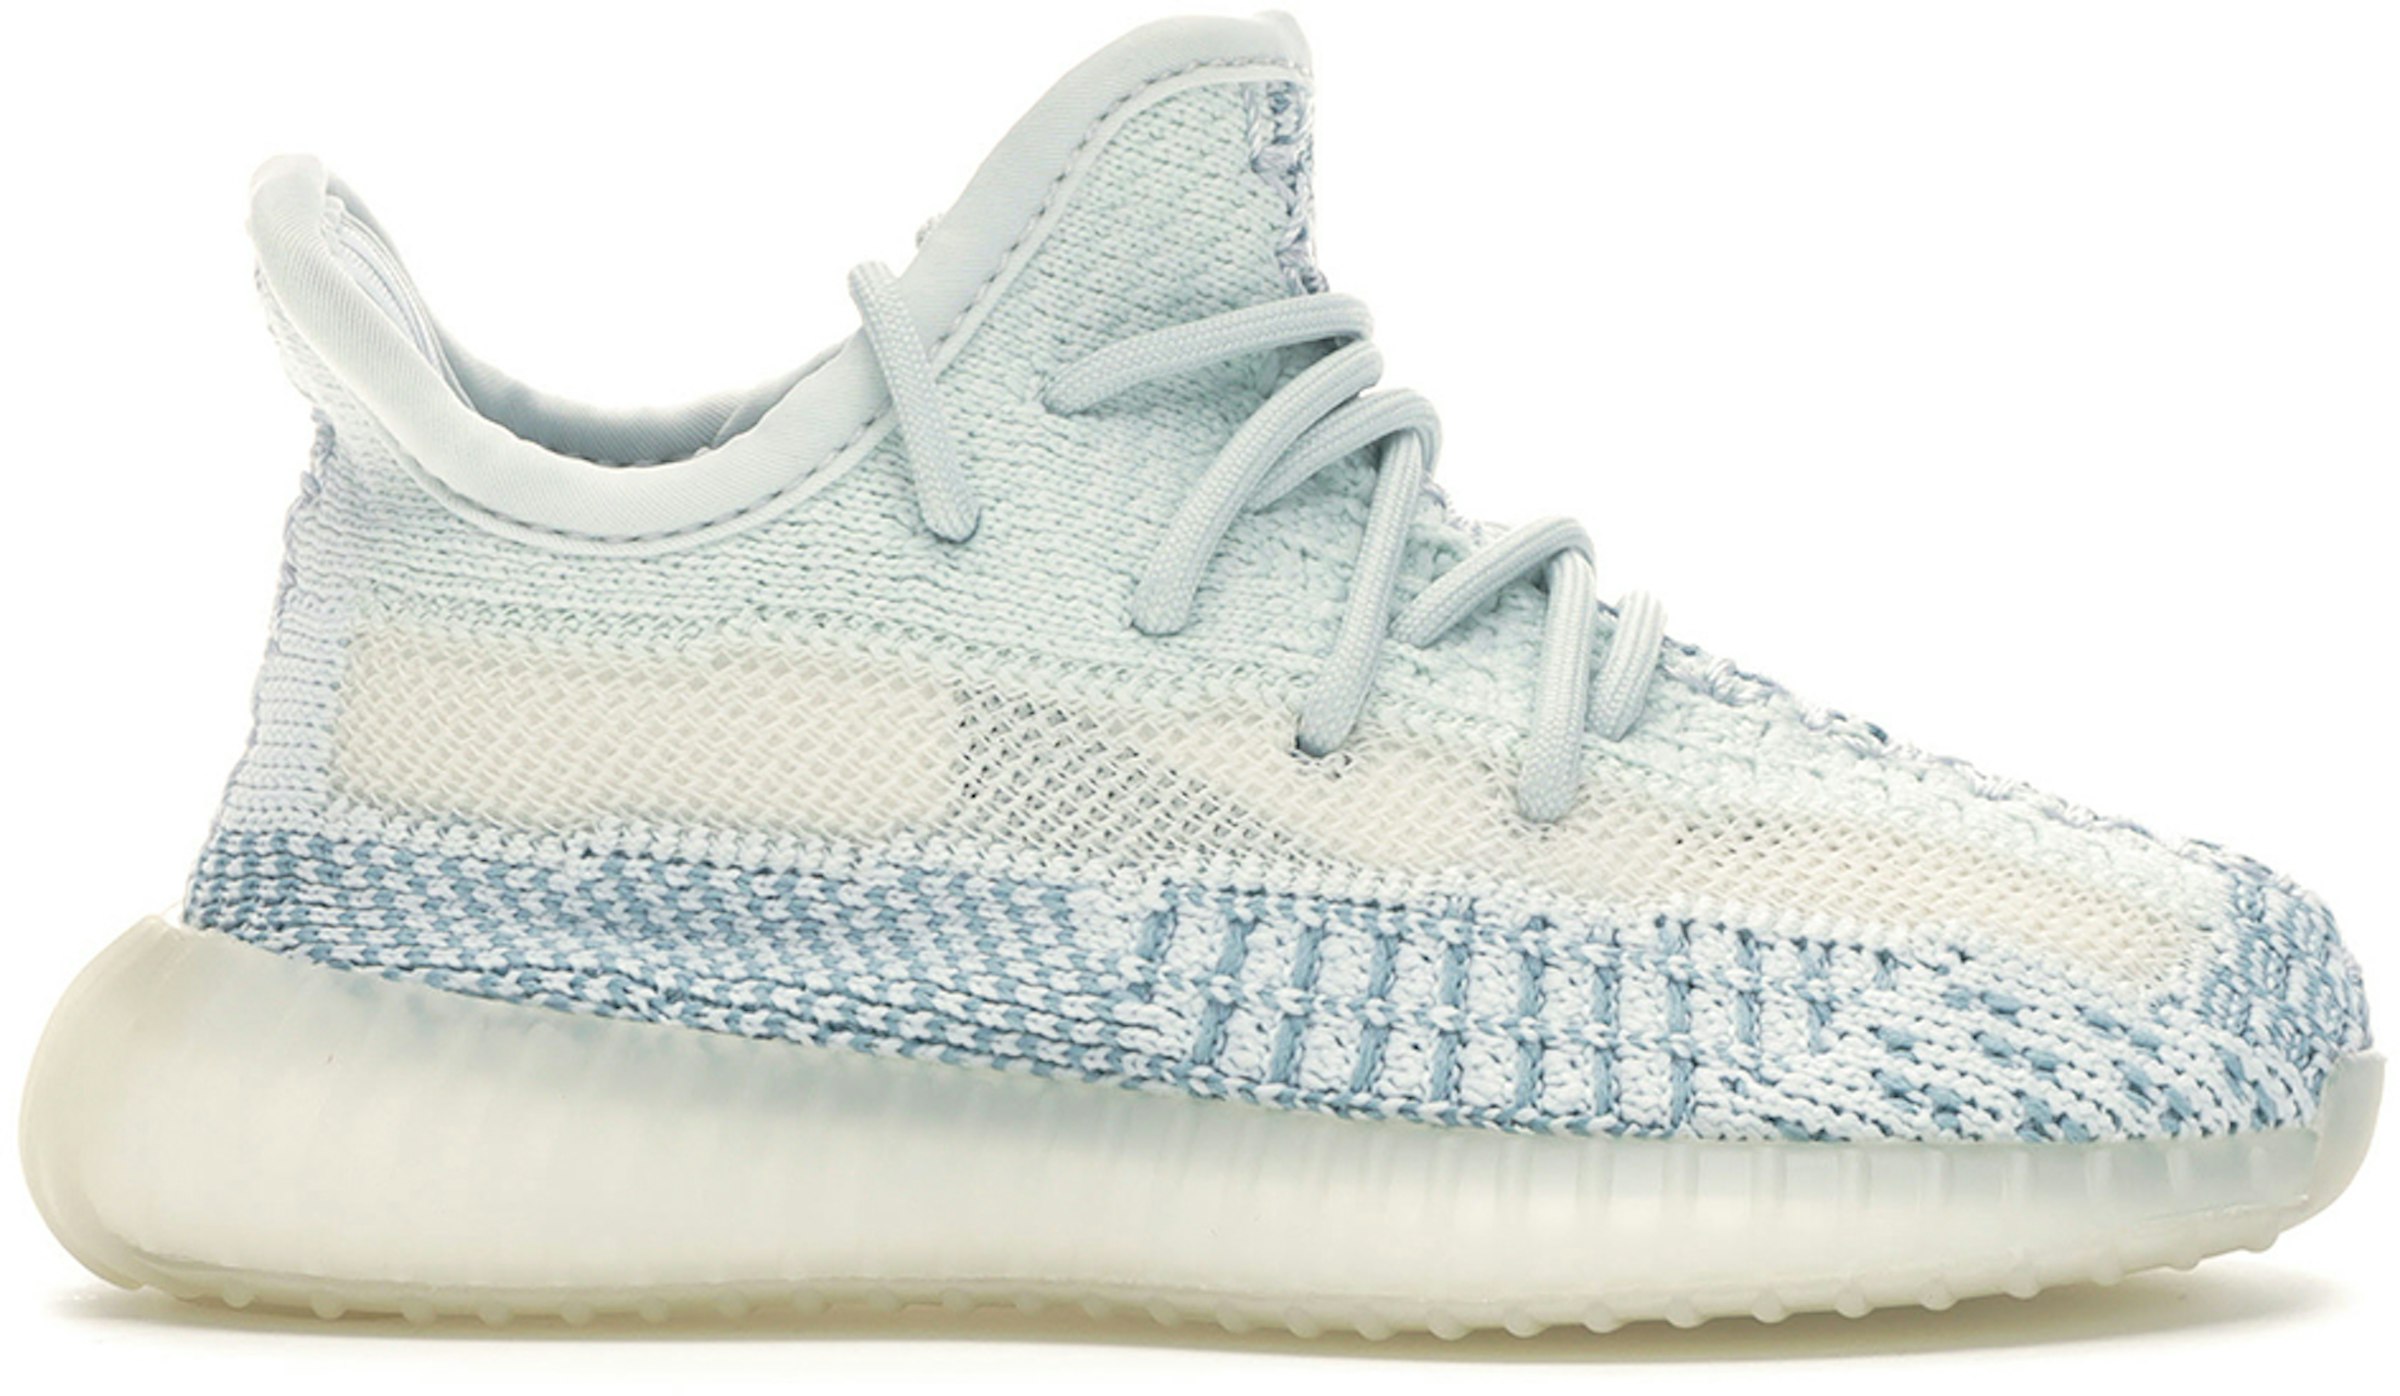 adidas Yeezy Boost 350 Cloud White (Infant) Infant - FW3046 US